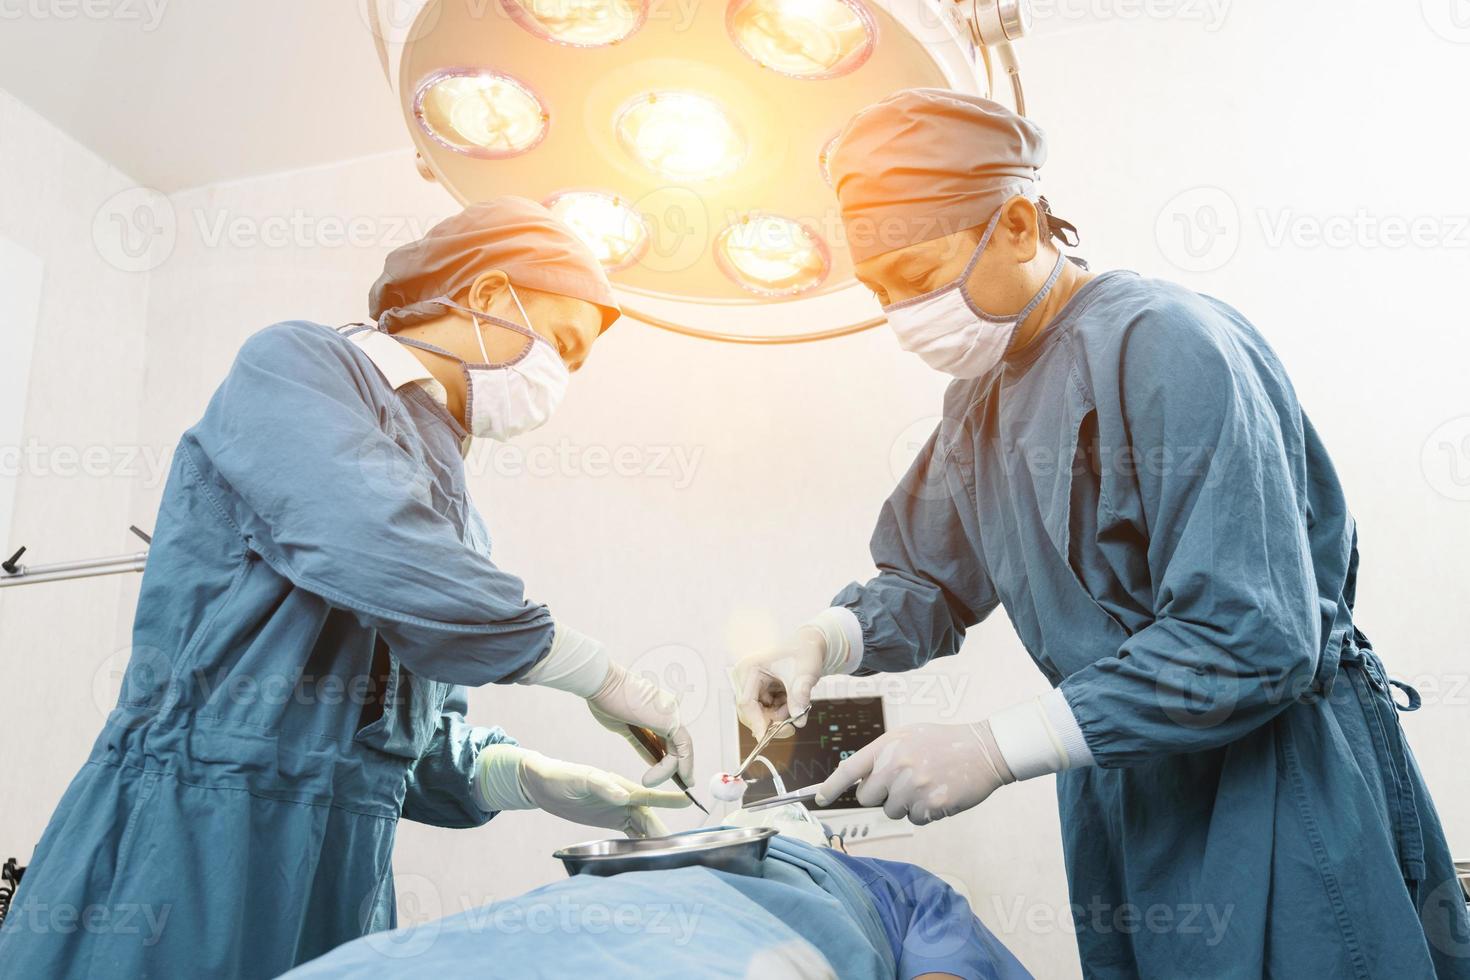 surgeon operating patient with an assistant in the operating room. Surgery and emergency concept photo